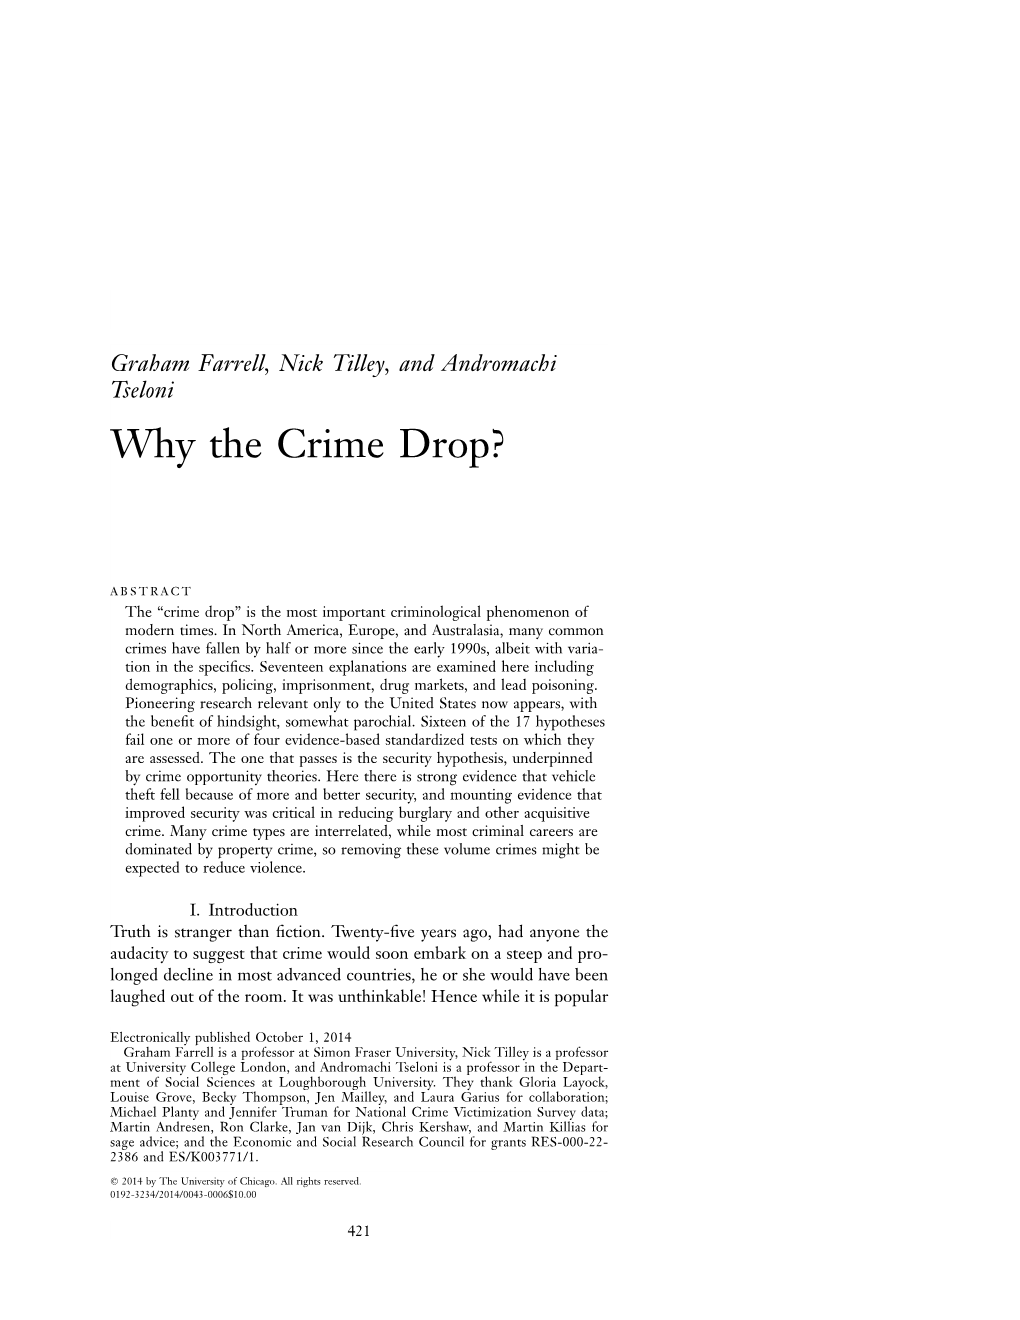 Why the Crime Drop?